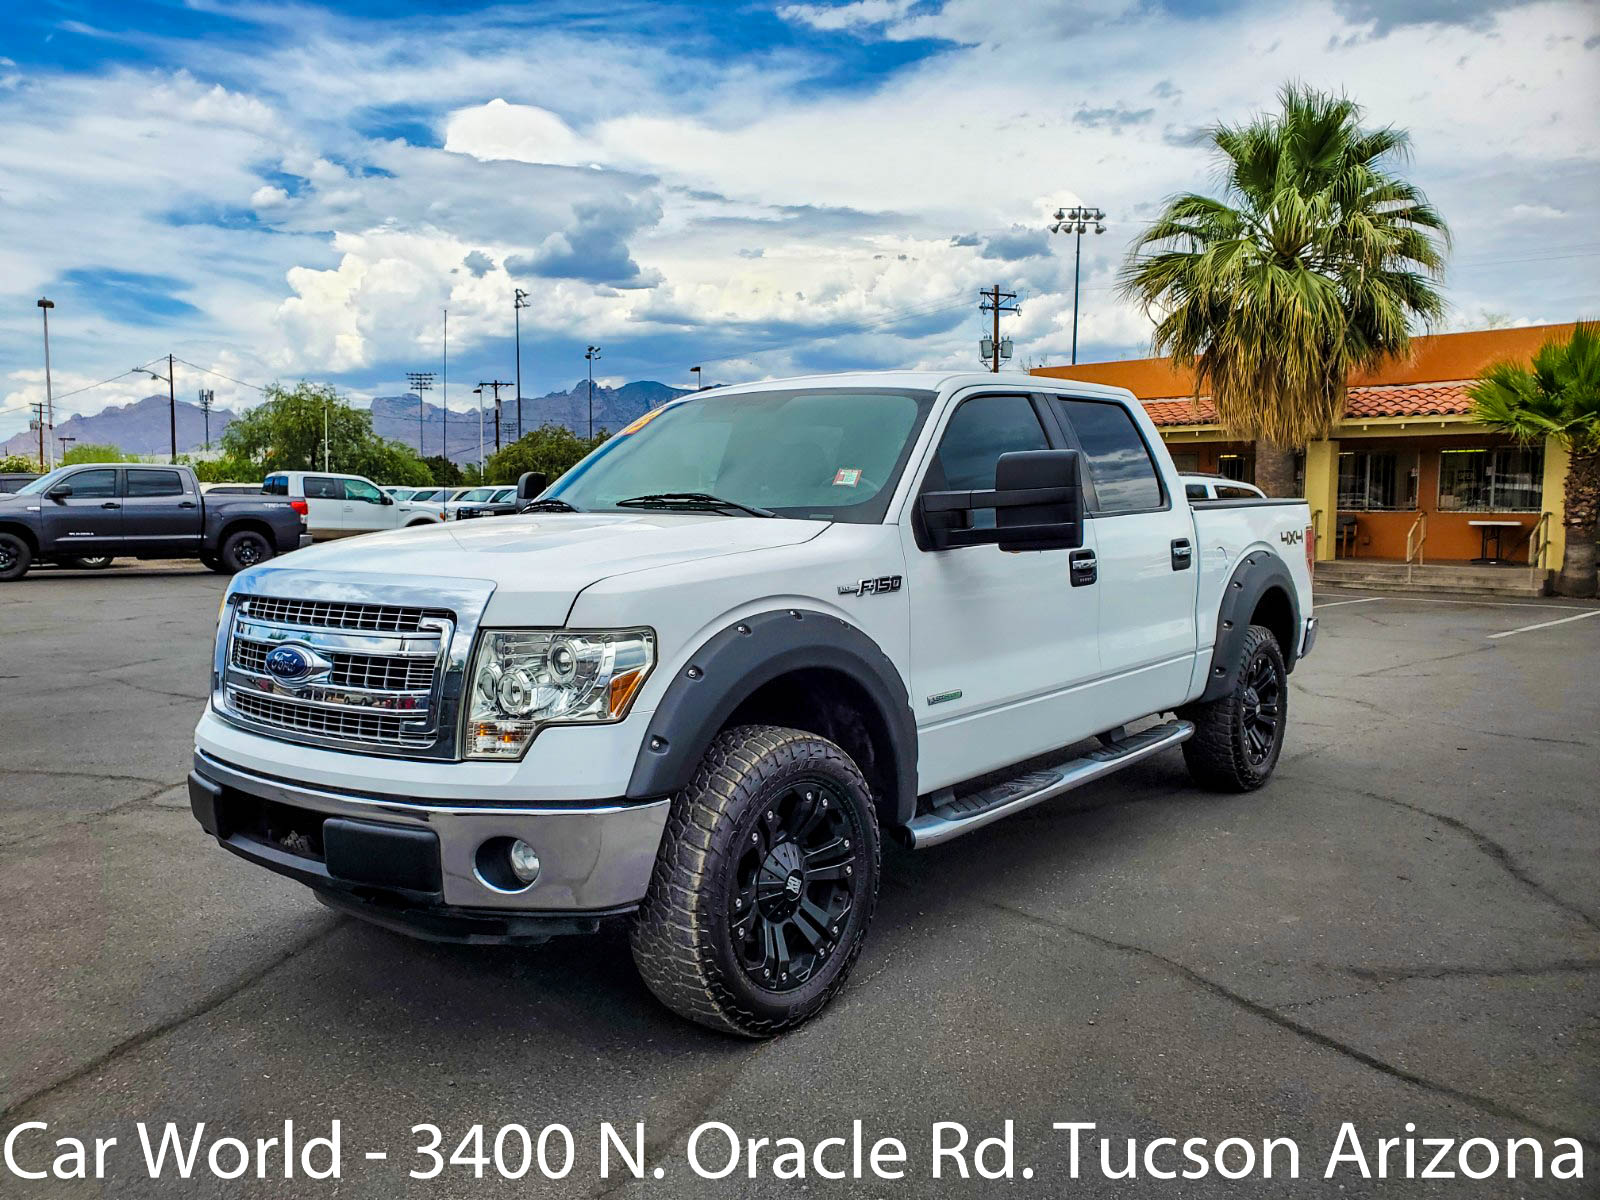 Car World  Tucson used cars - Your source for used vehicles!